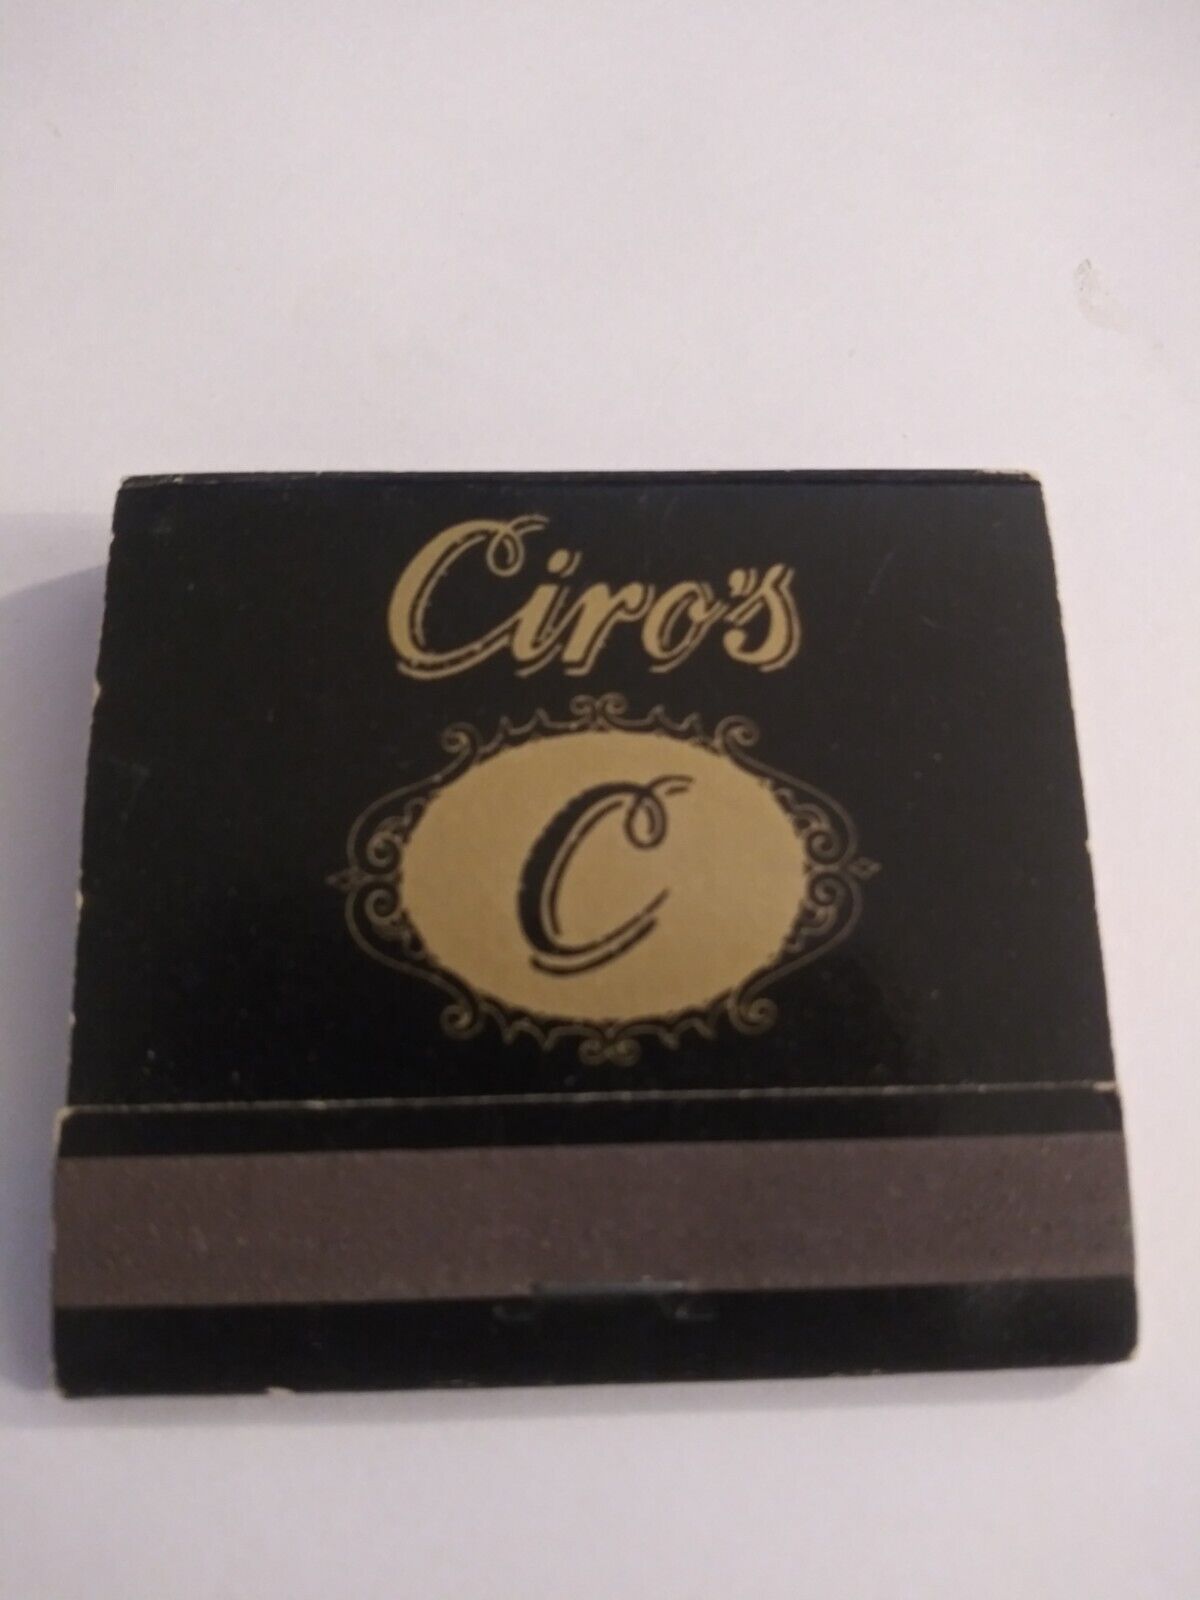 Vintage Matchbox Cover From Ciro\'s Top Of The Mall Monaca Pennsylvania. 